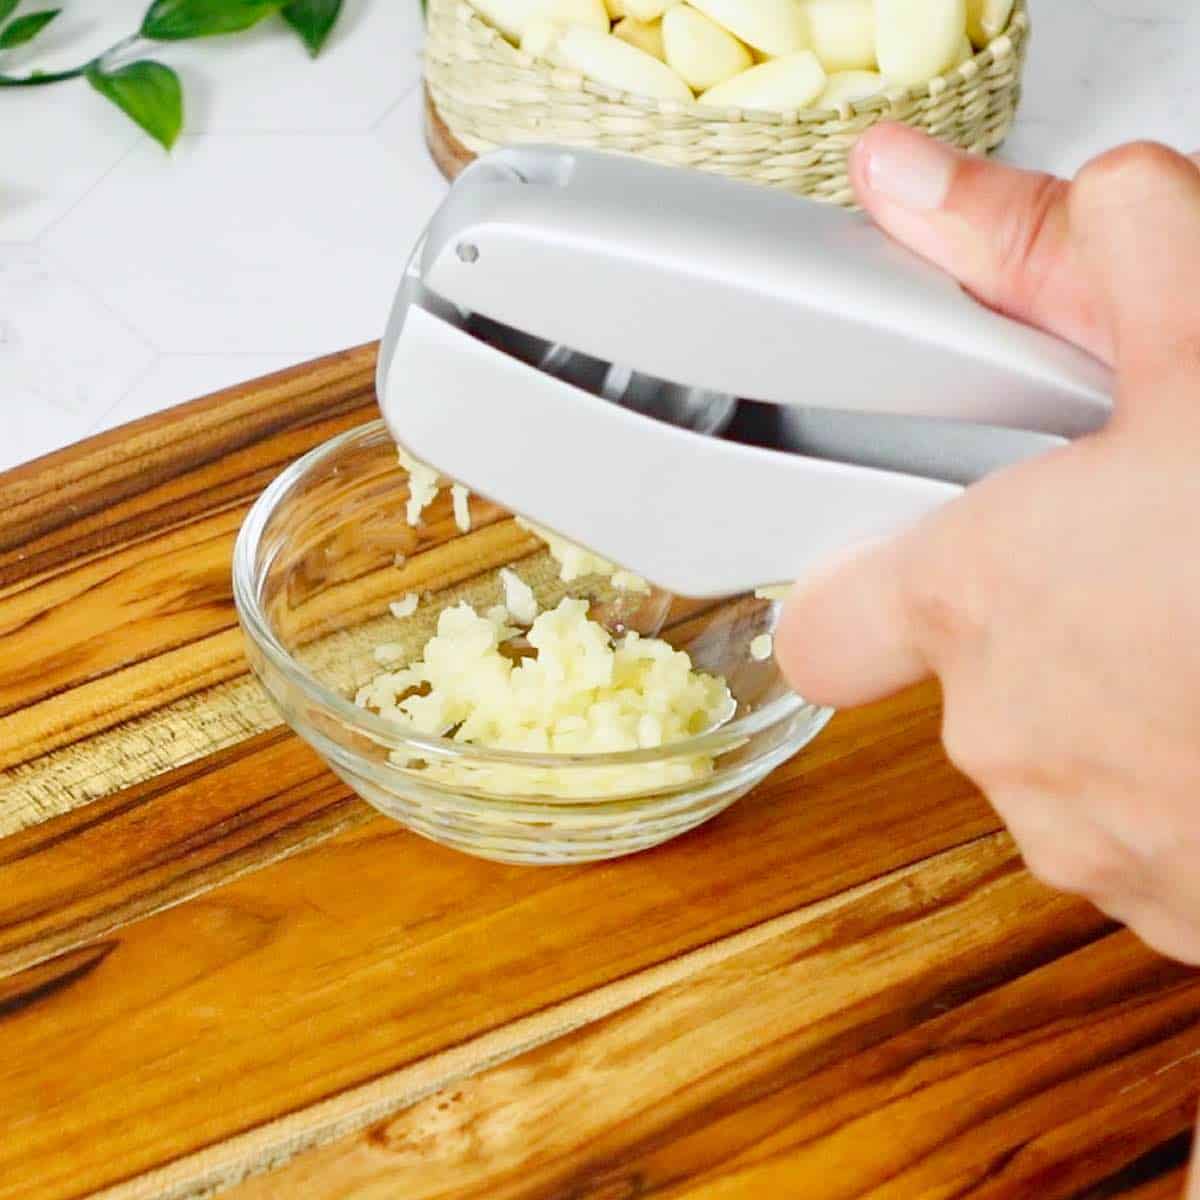 Peeling and mincing garlic in one step with a garlic press.